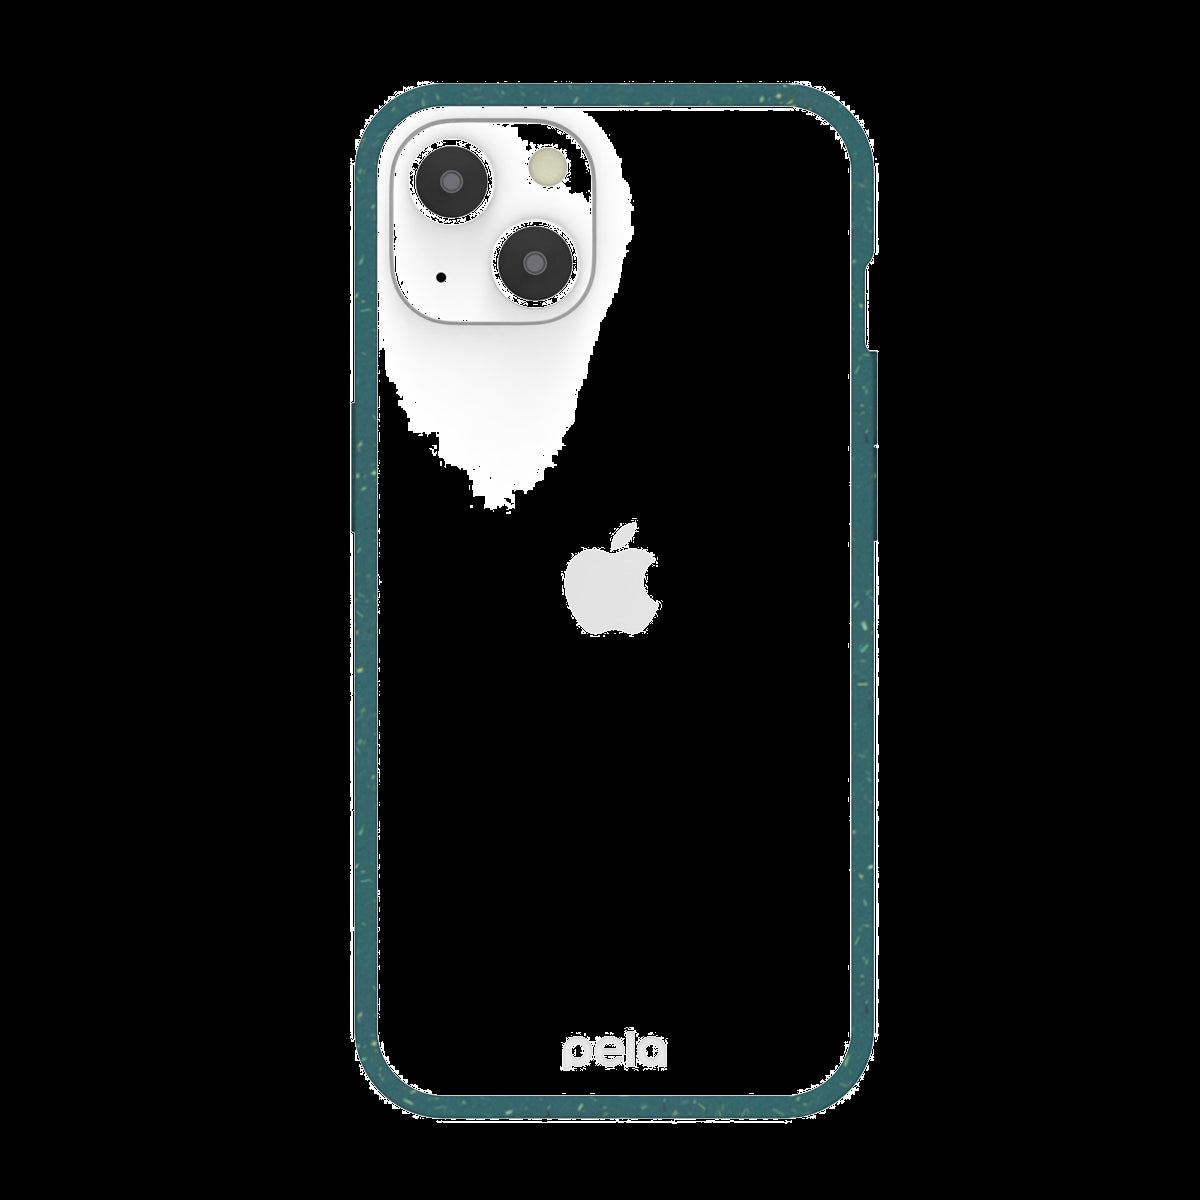 Clear without plastic, the Pela Clear case is a 100% compostable transparent case with impact-absorbent edges to protect your phone.